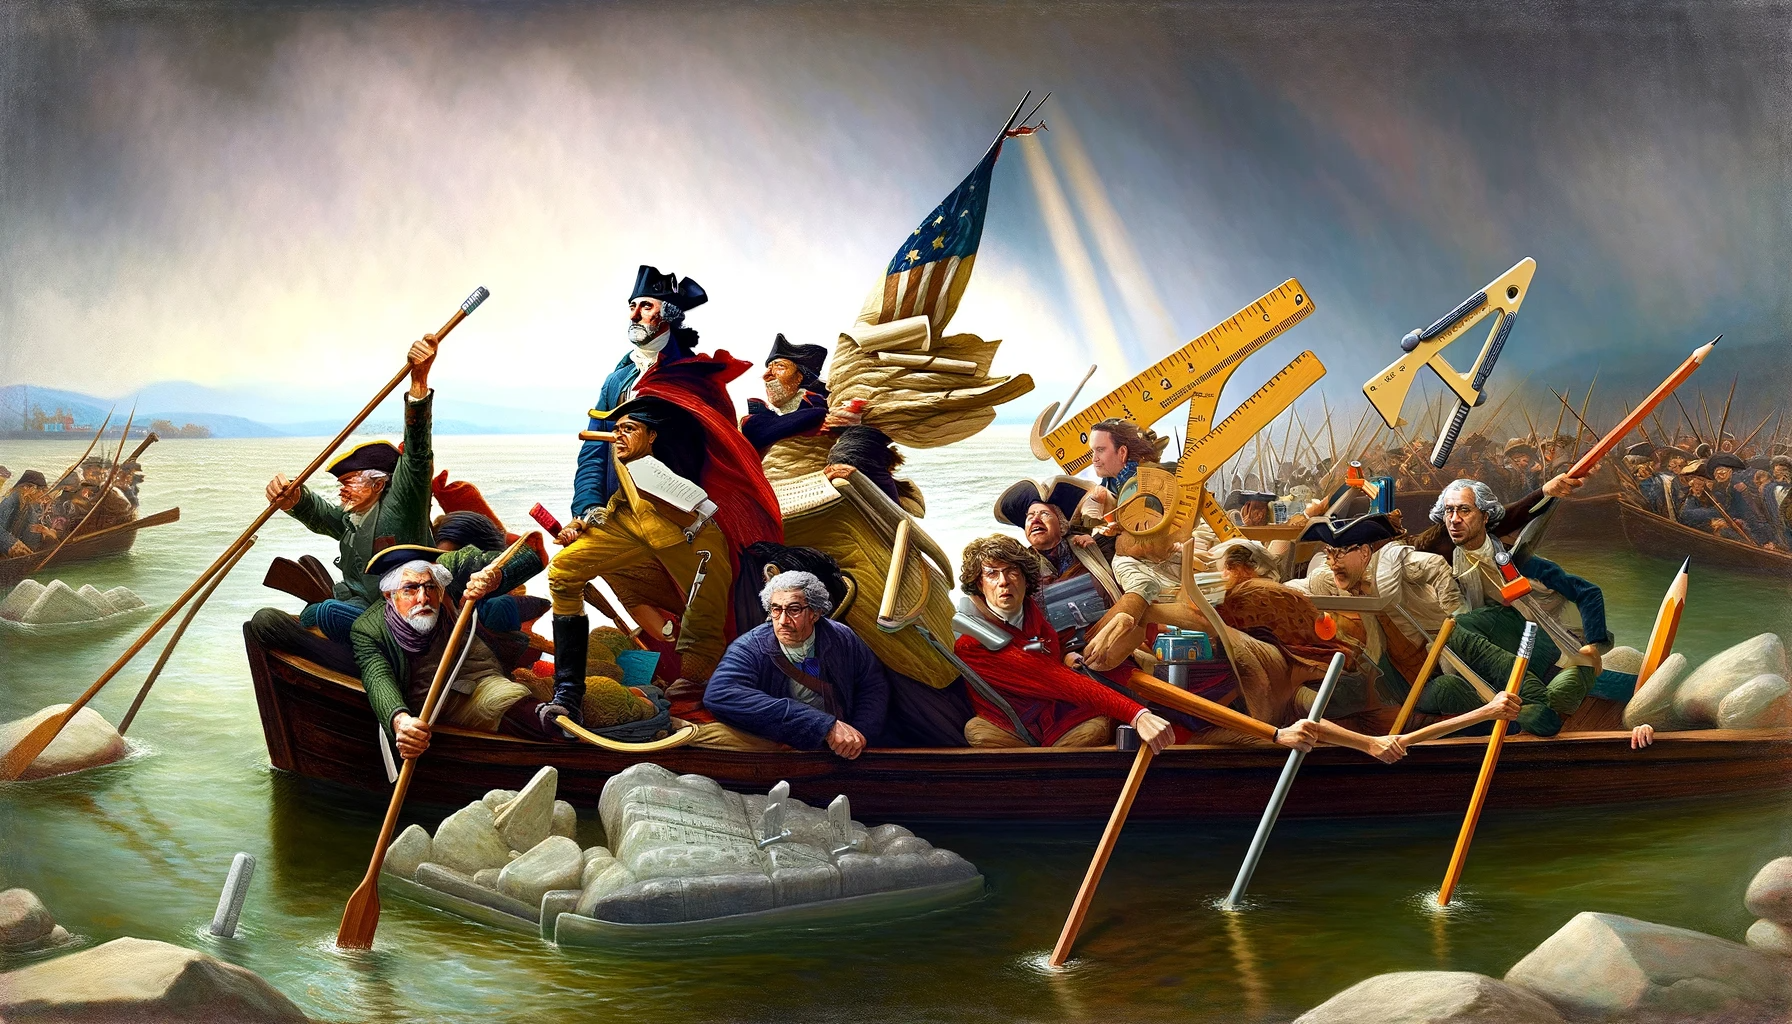 A reimagining of Washington Crossing the Delaware painting, featuring teachers humorously armed with oversized school supplies.